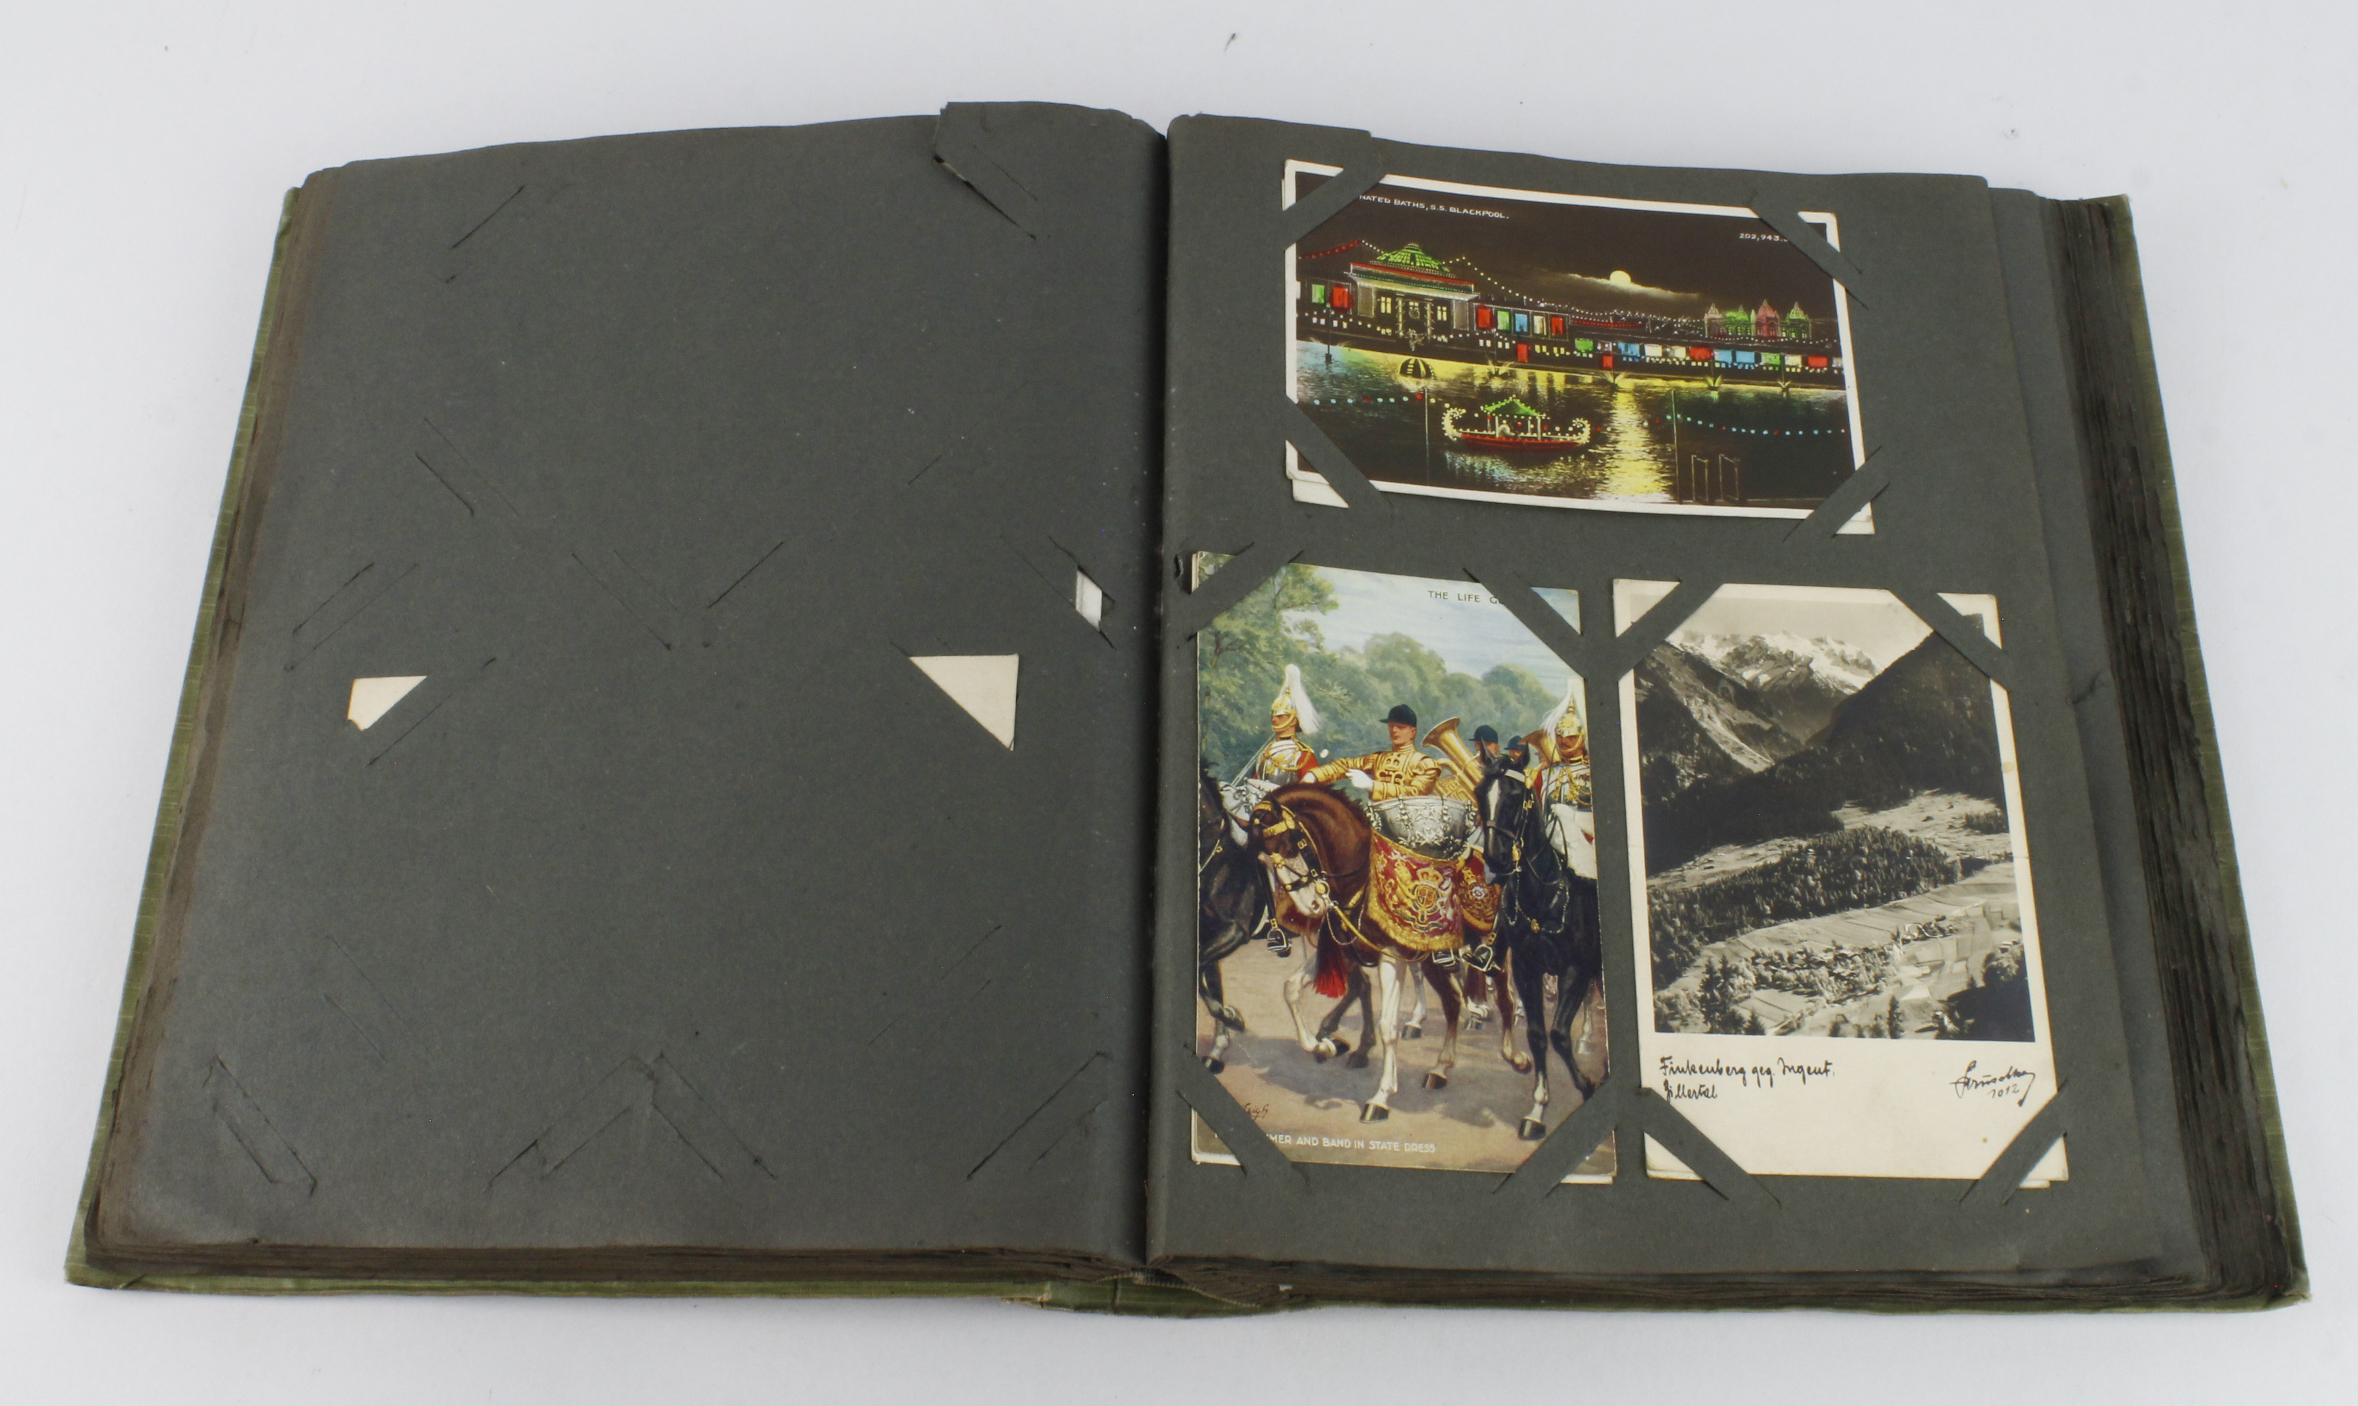 Edwardian postcard album with topographical inc much Norfolk, military, comic, actresses and glamour